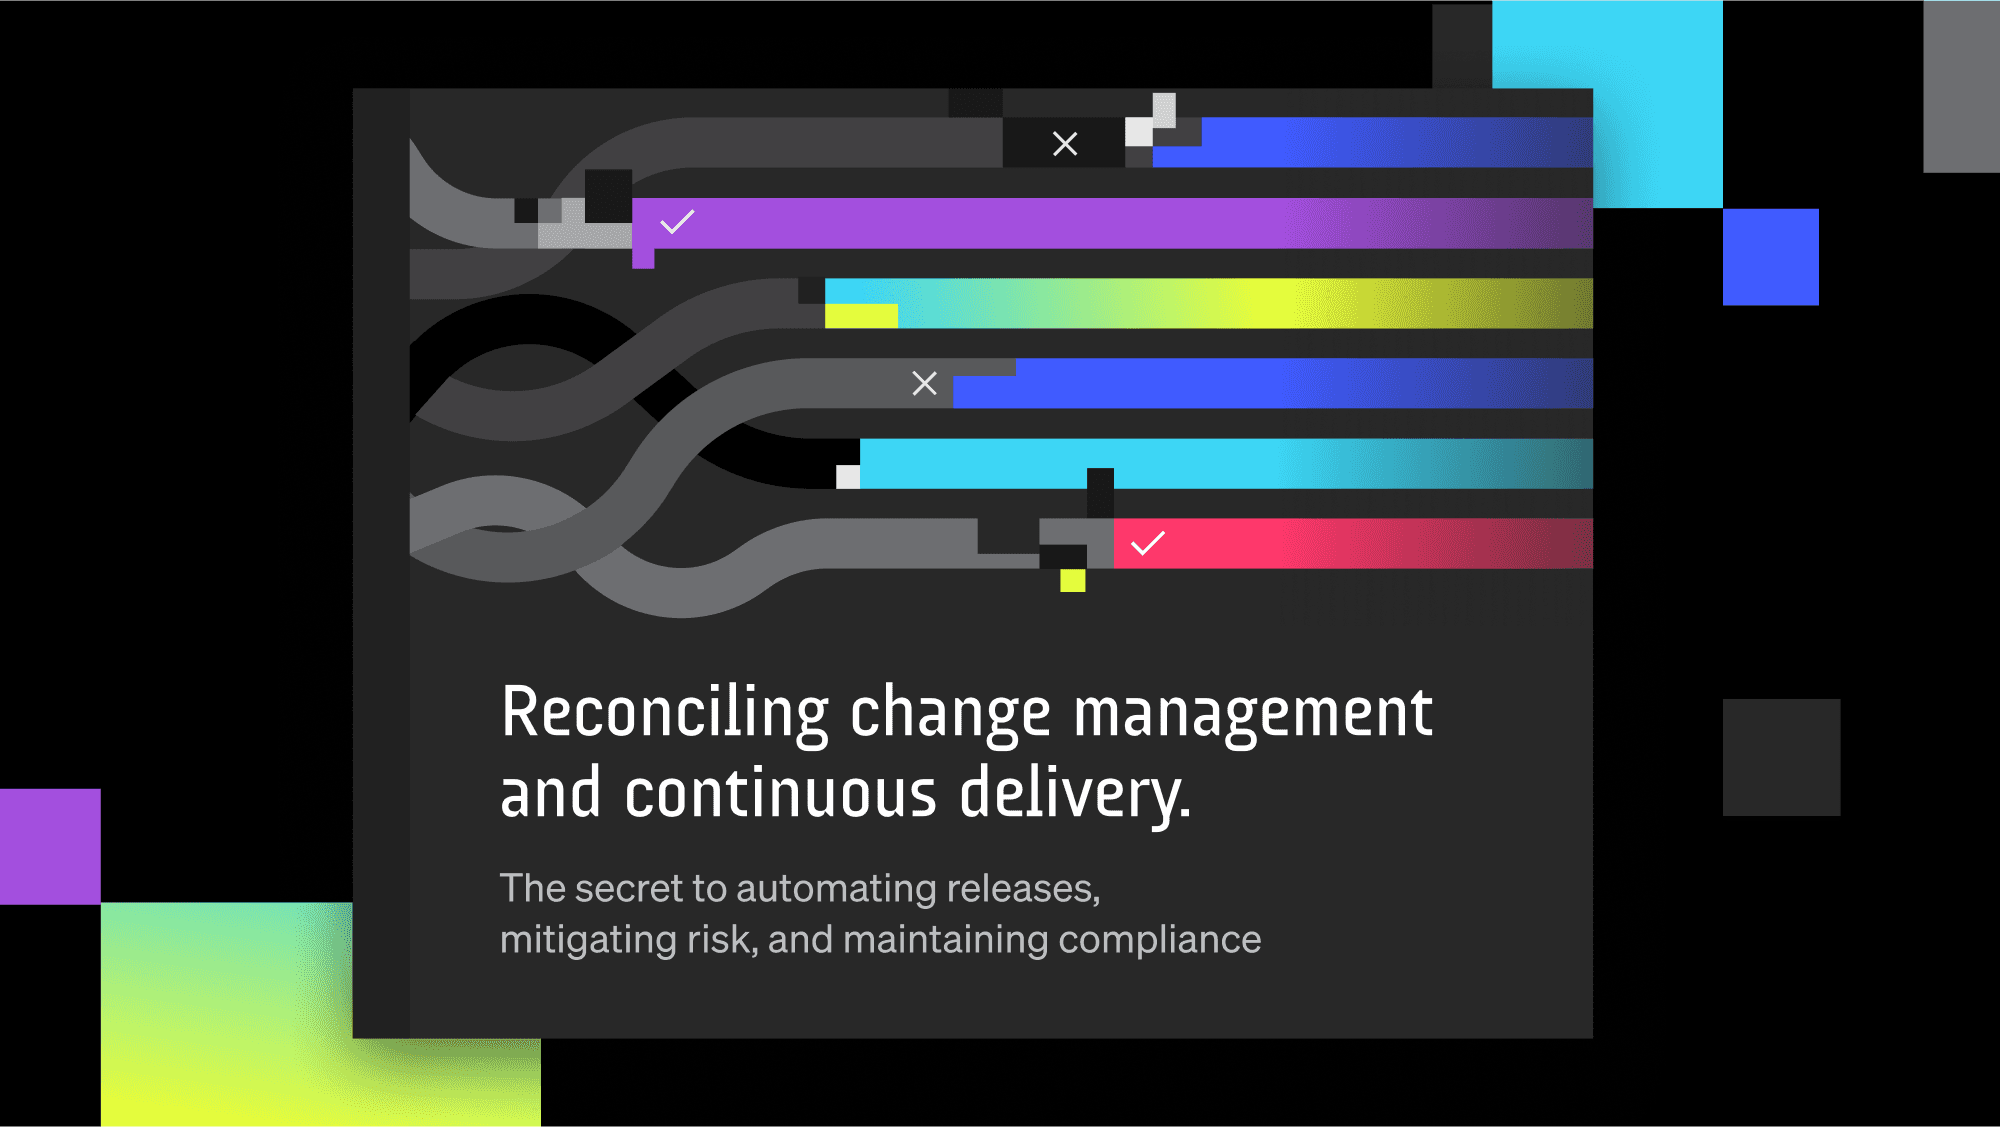 Reconciling change management and continuous delivery